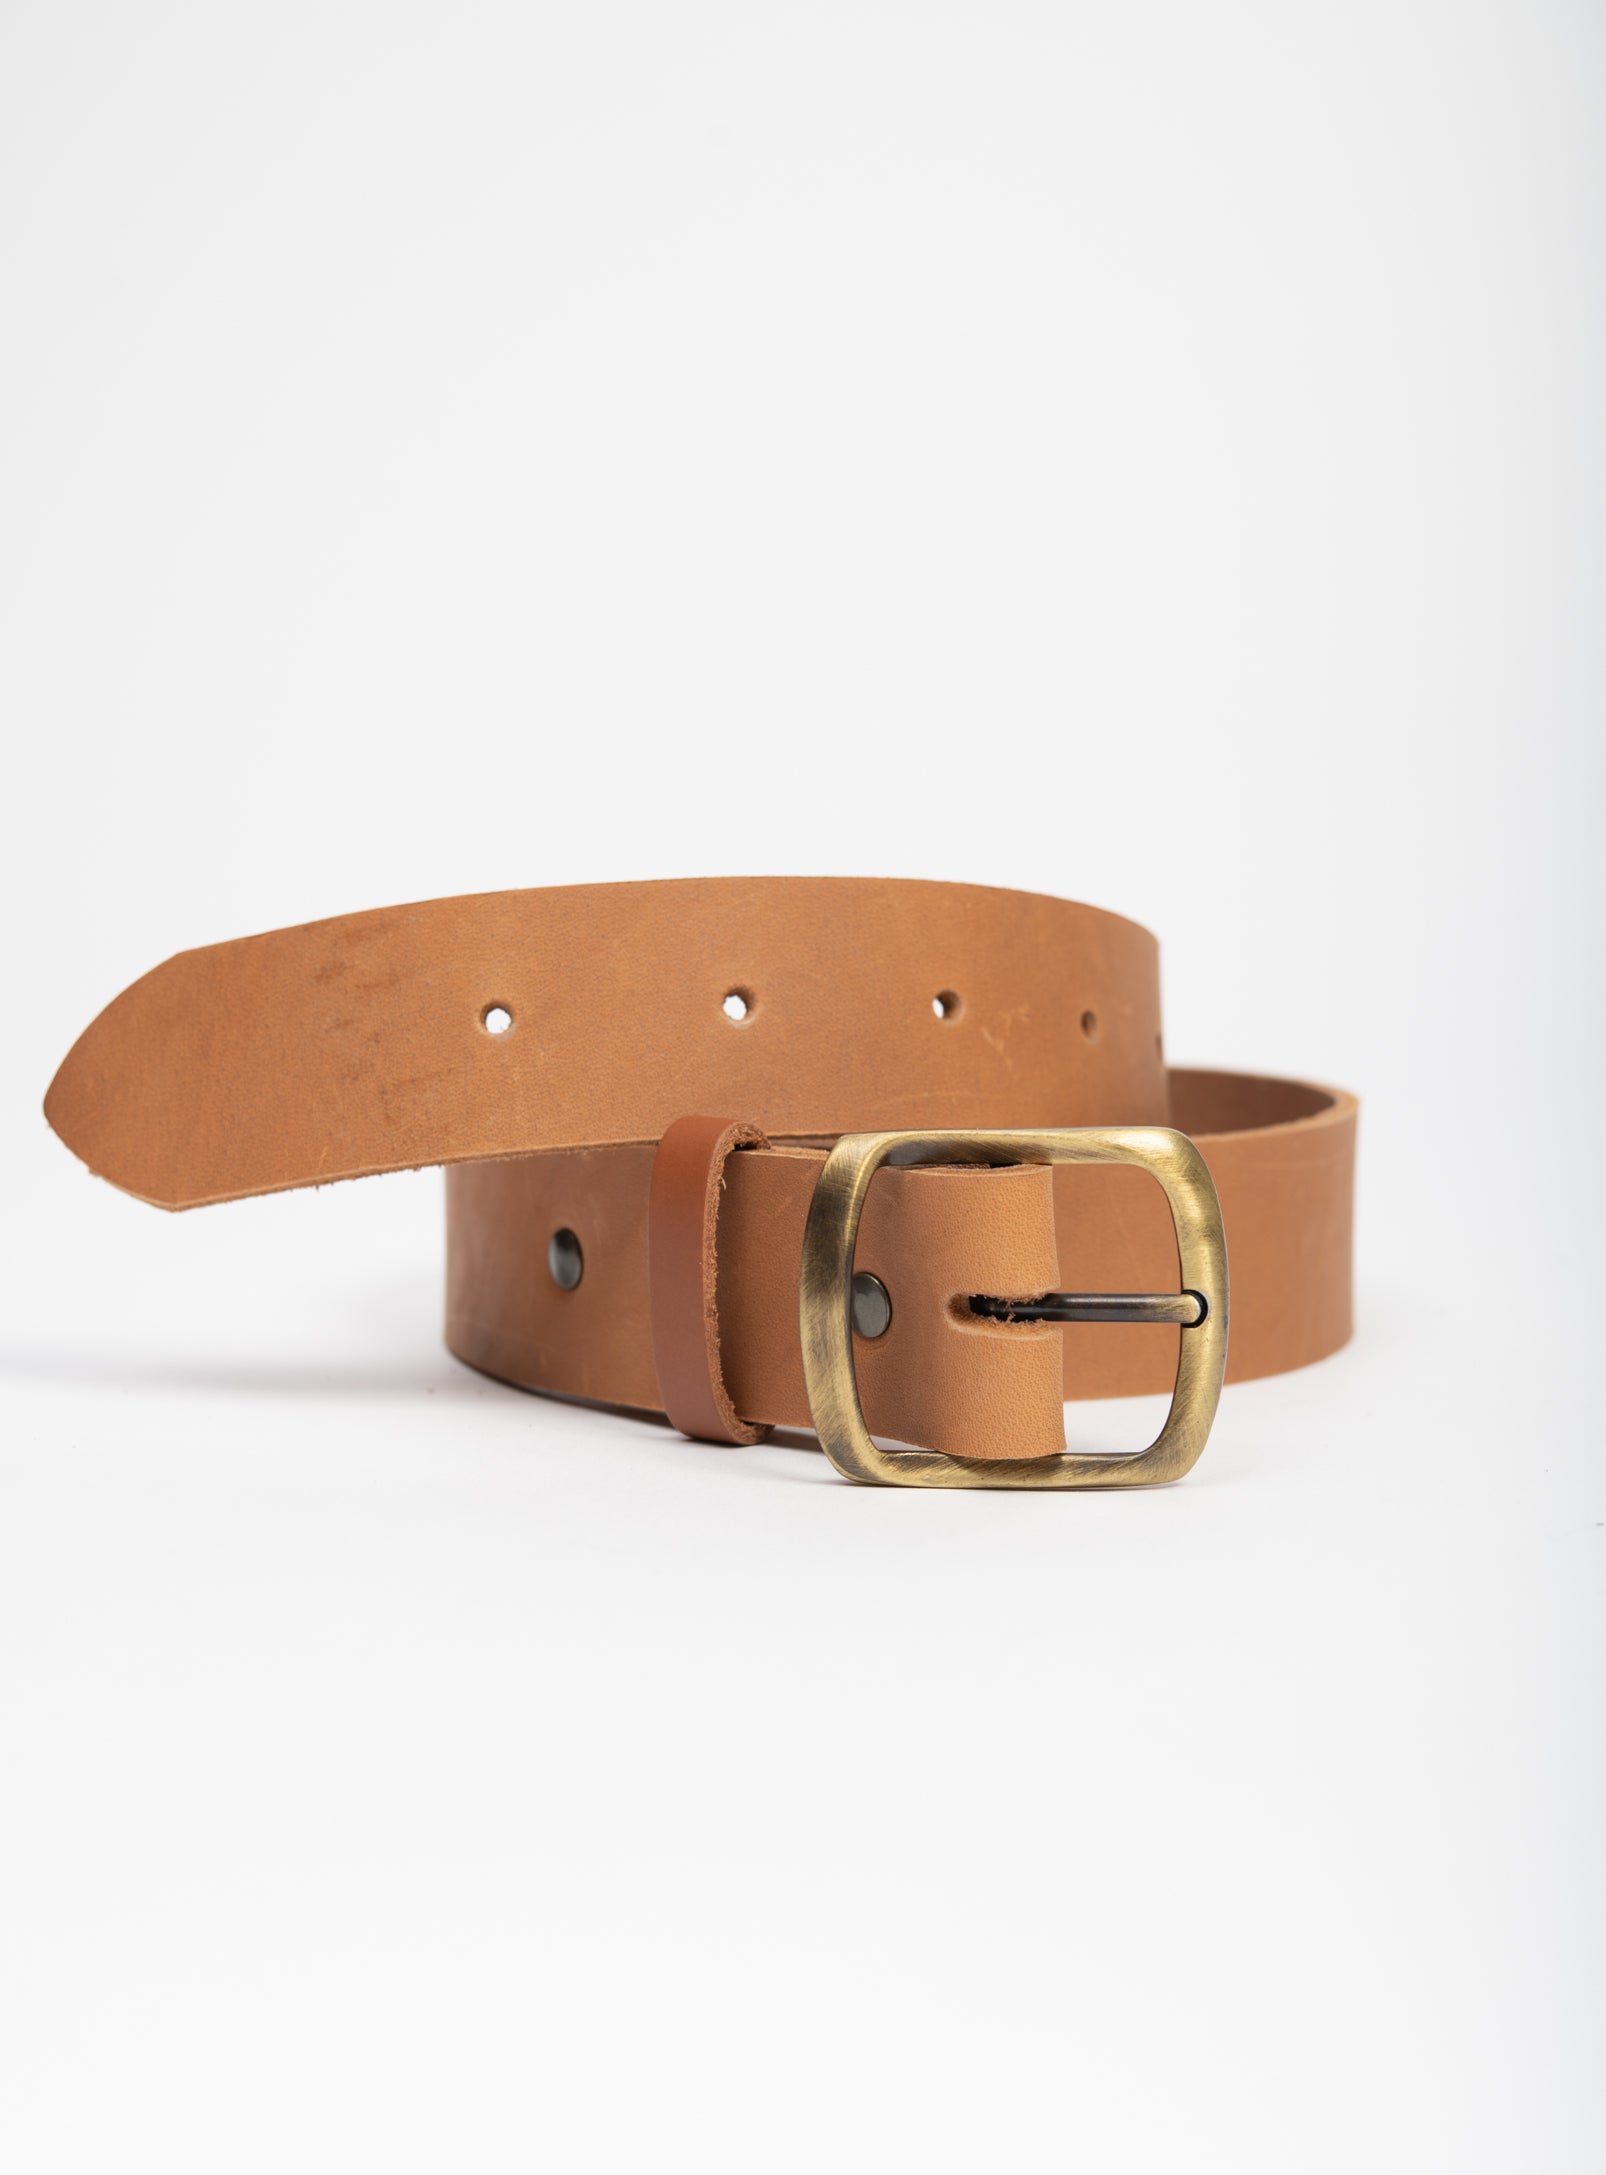 Leather belt with solid brass buckle by Veinage, handmade in Montreal, Canada